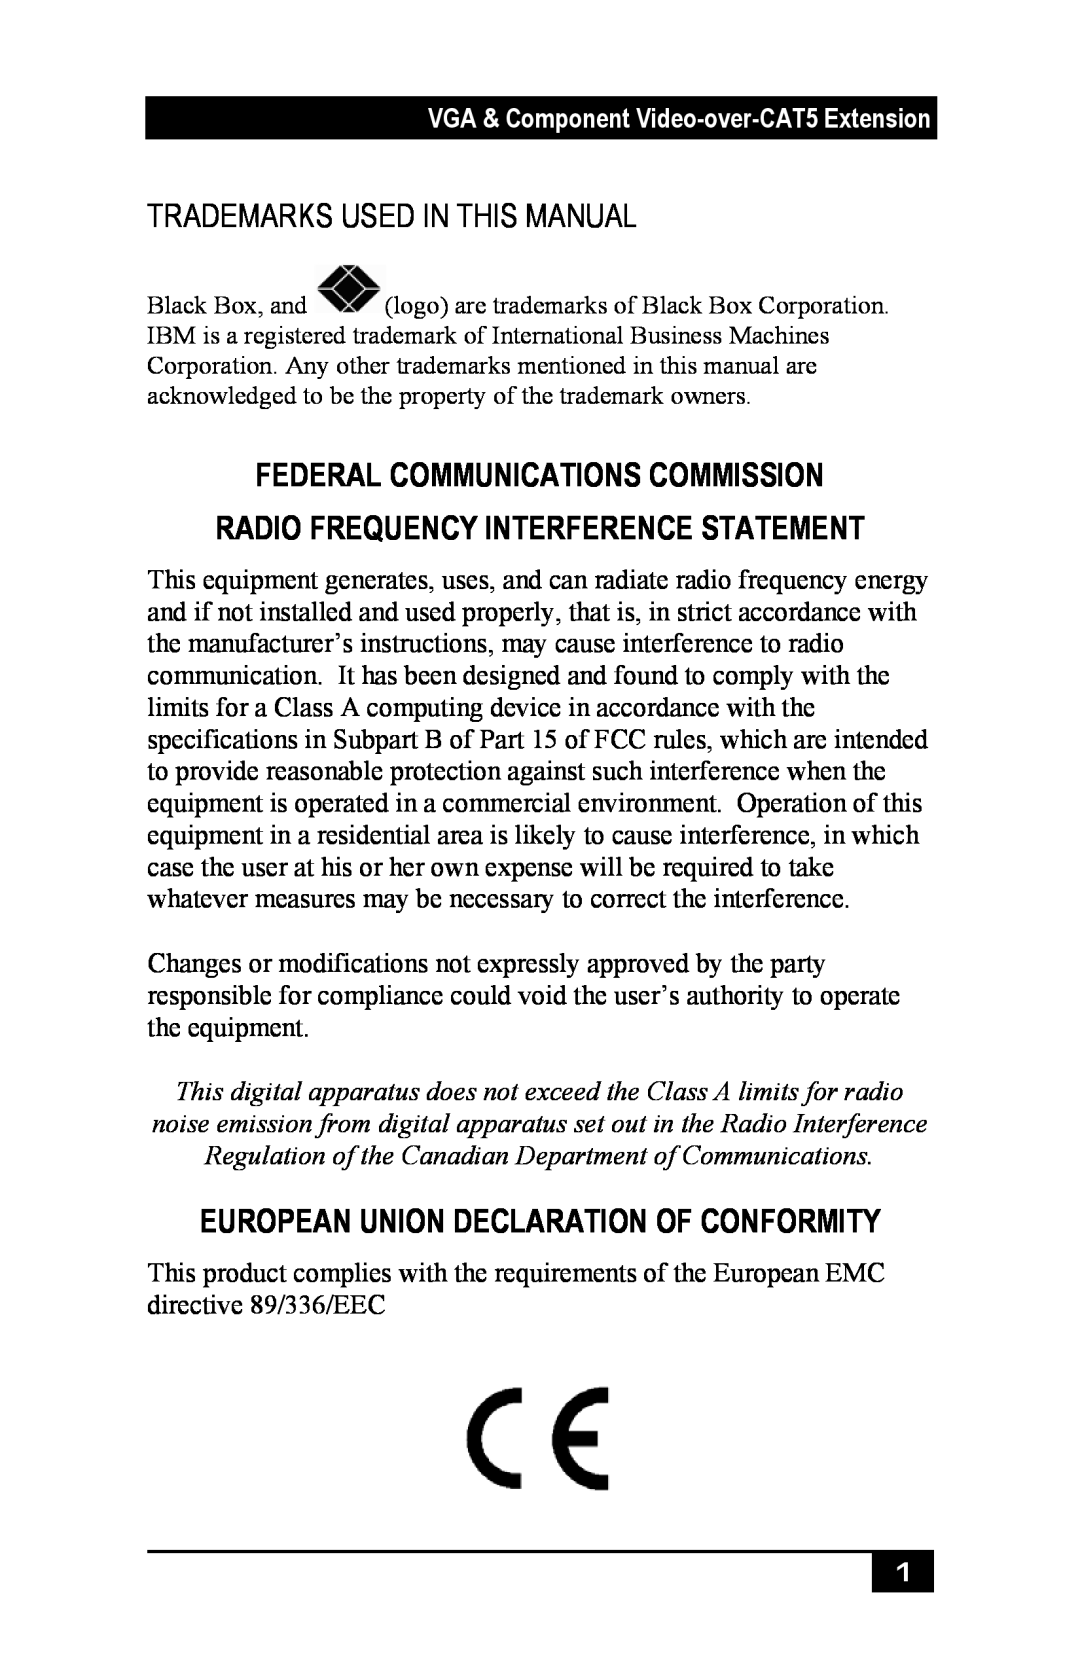 Black Box AC504A-CP manual Federal Communications Commission, Radio Frequency Interference Statement 